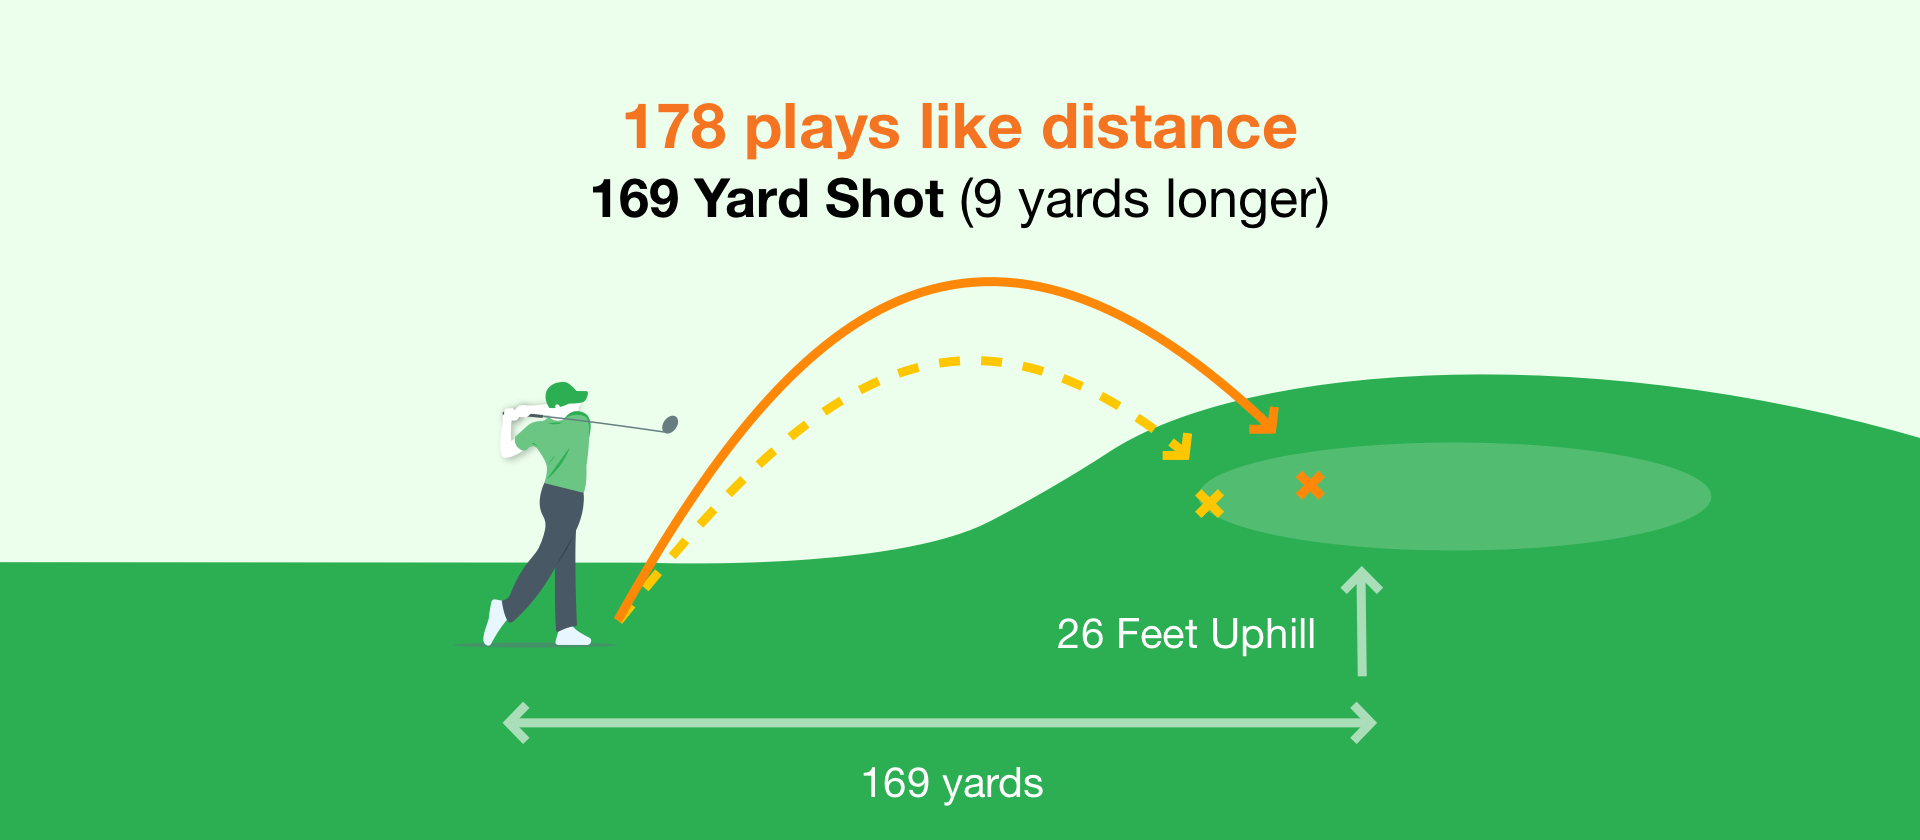 How Does Slope and Elevation affect shot distances on the golf course